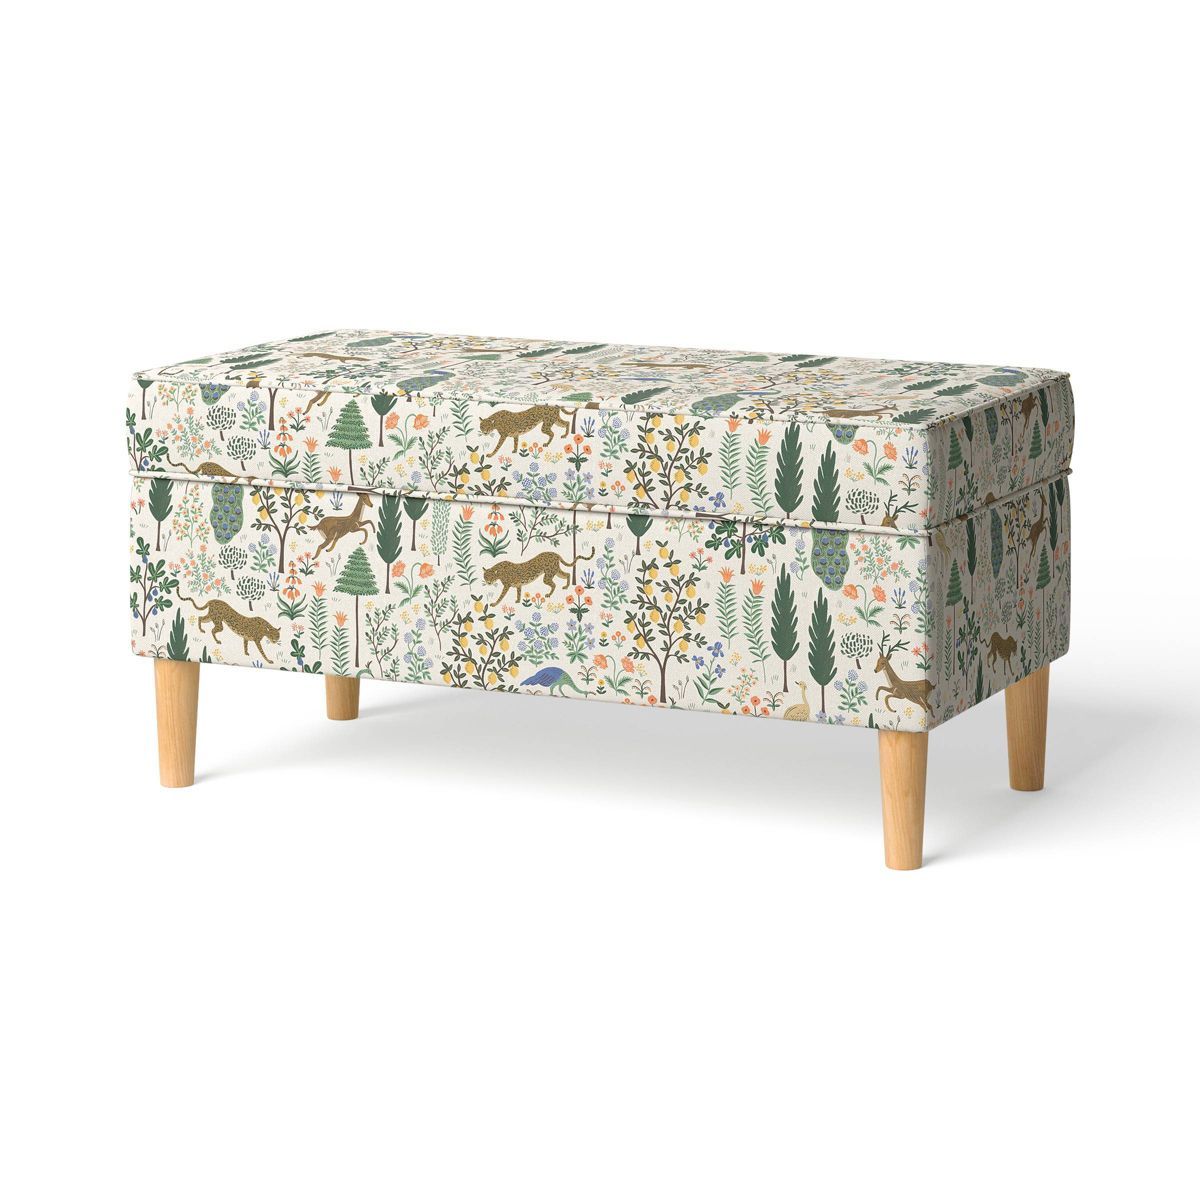 Rifle Paper Co. x Target Storage Bench Menagerie | Target